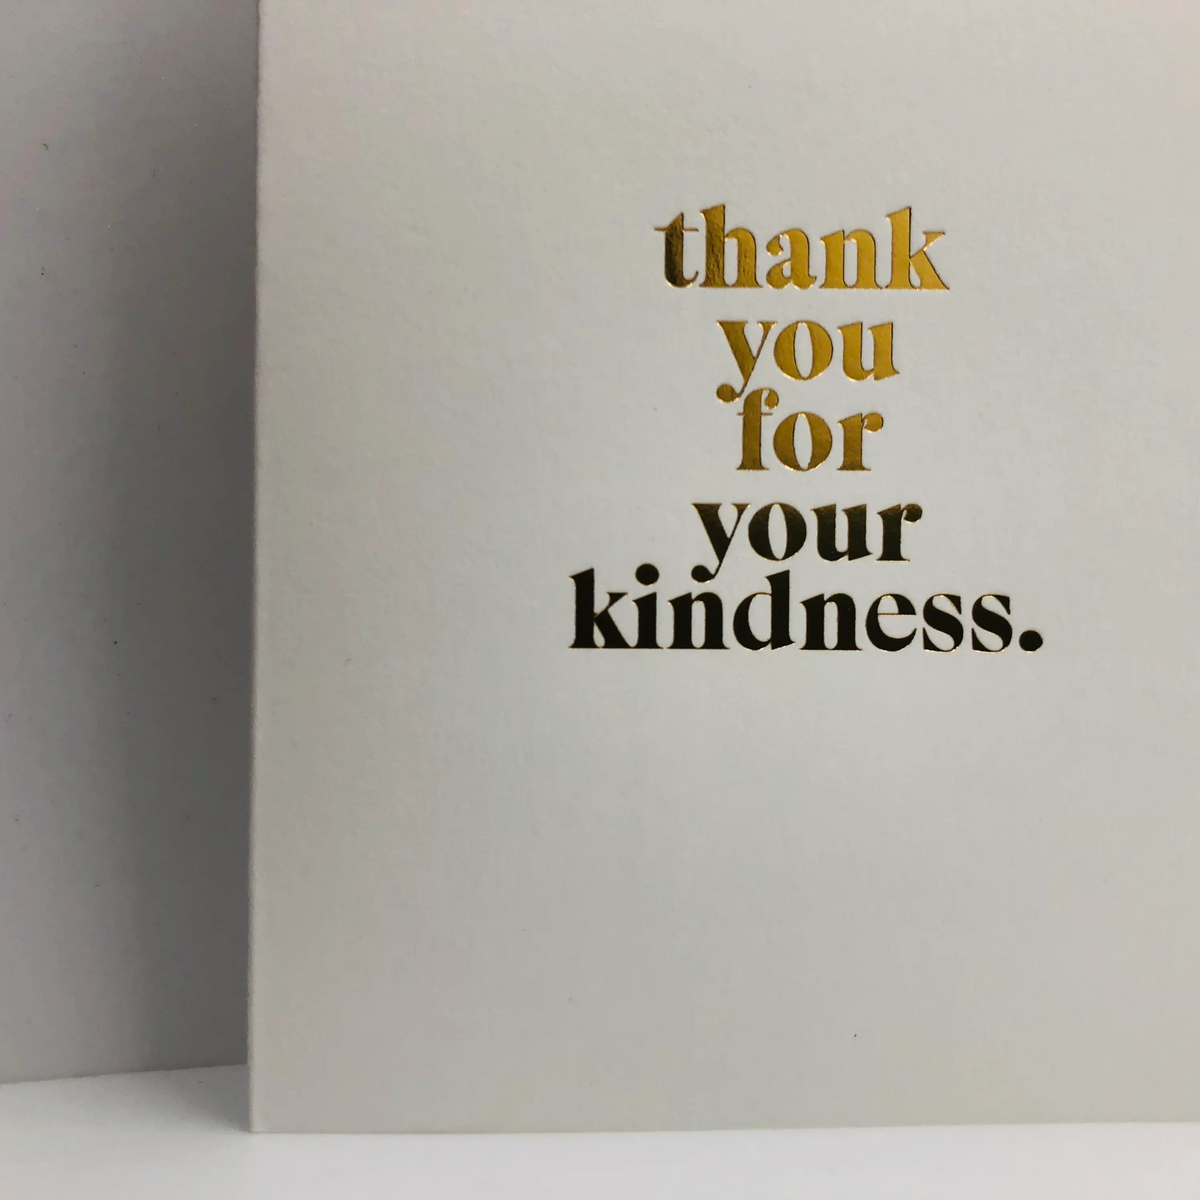 Thank You For Your Kindness Card